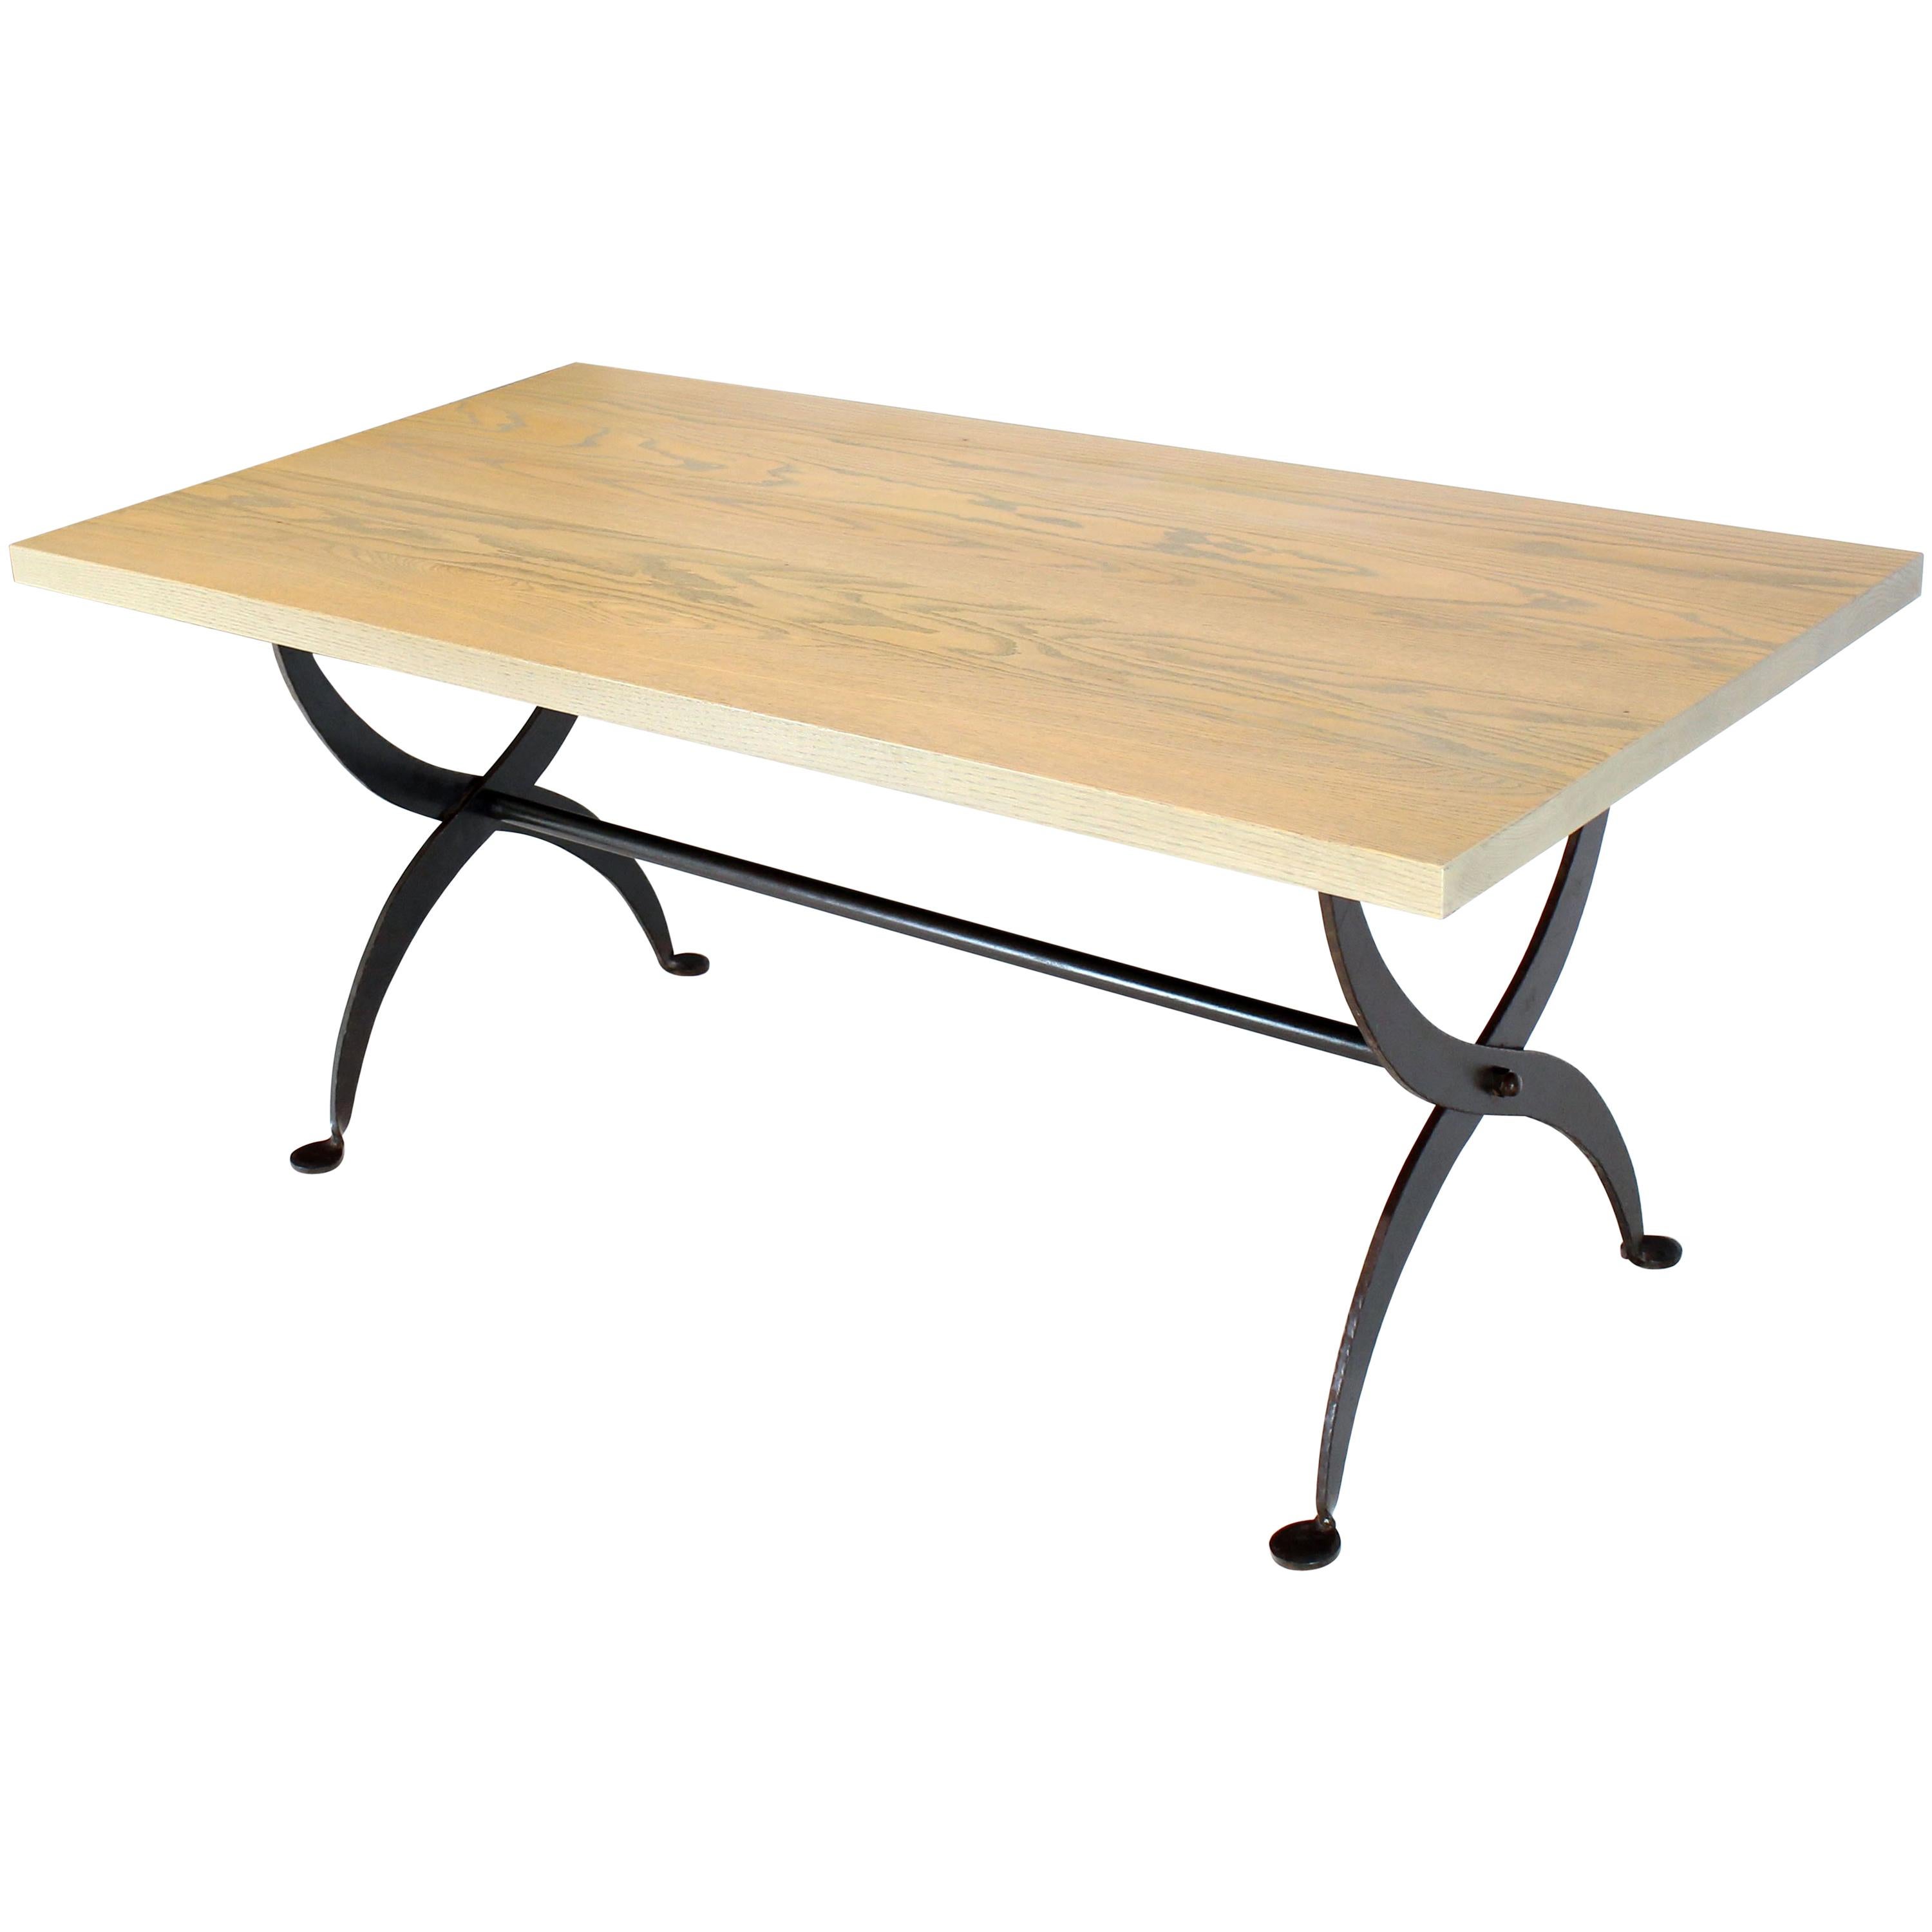 Solid White Wash Finish Oak Top Scissor Wrought Iron Base Harvest Dining Table